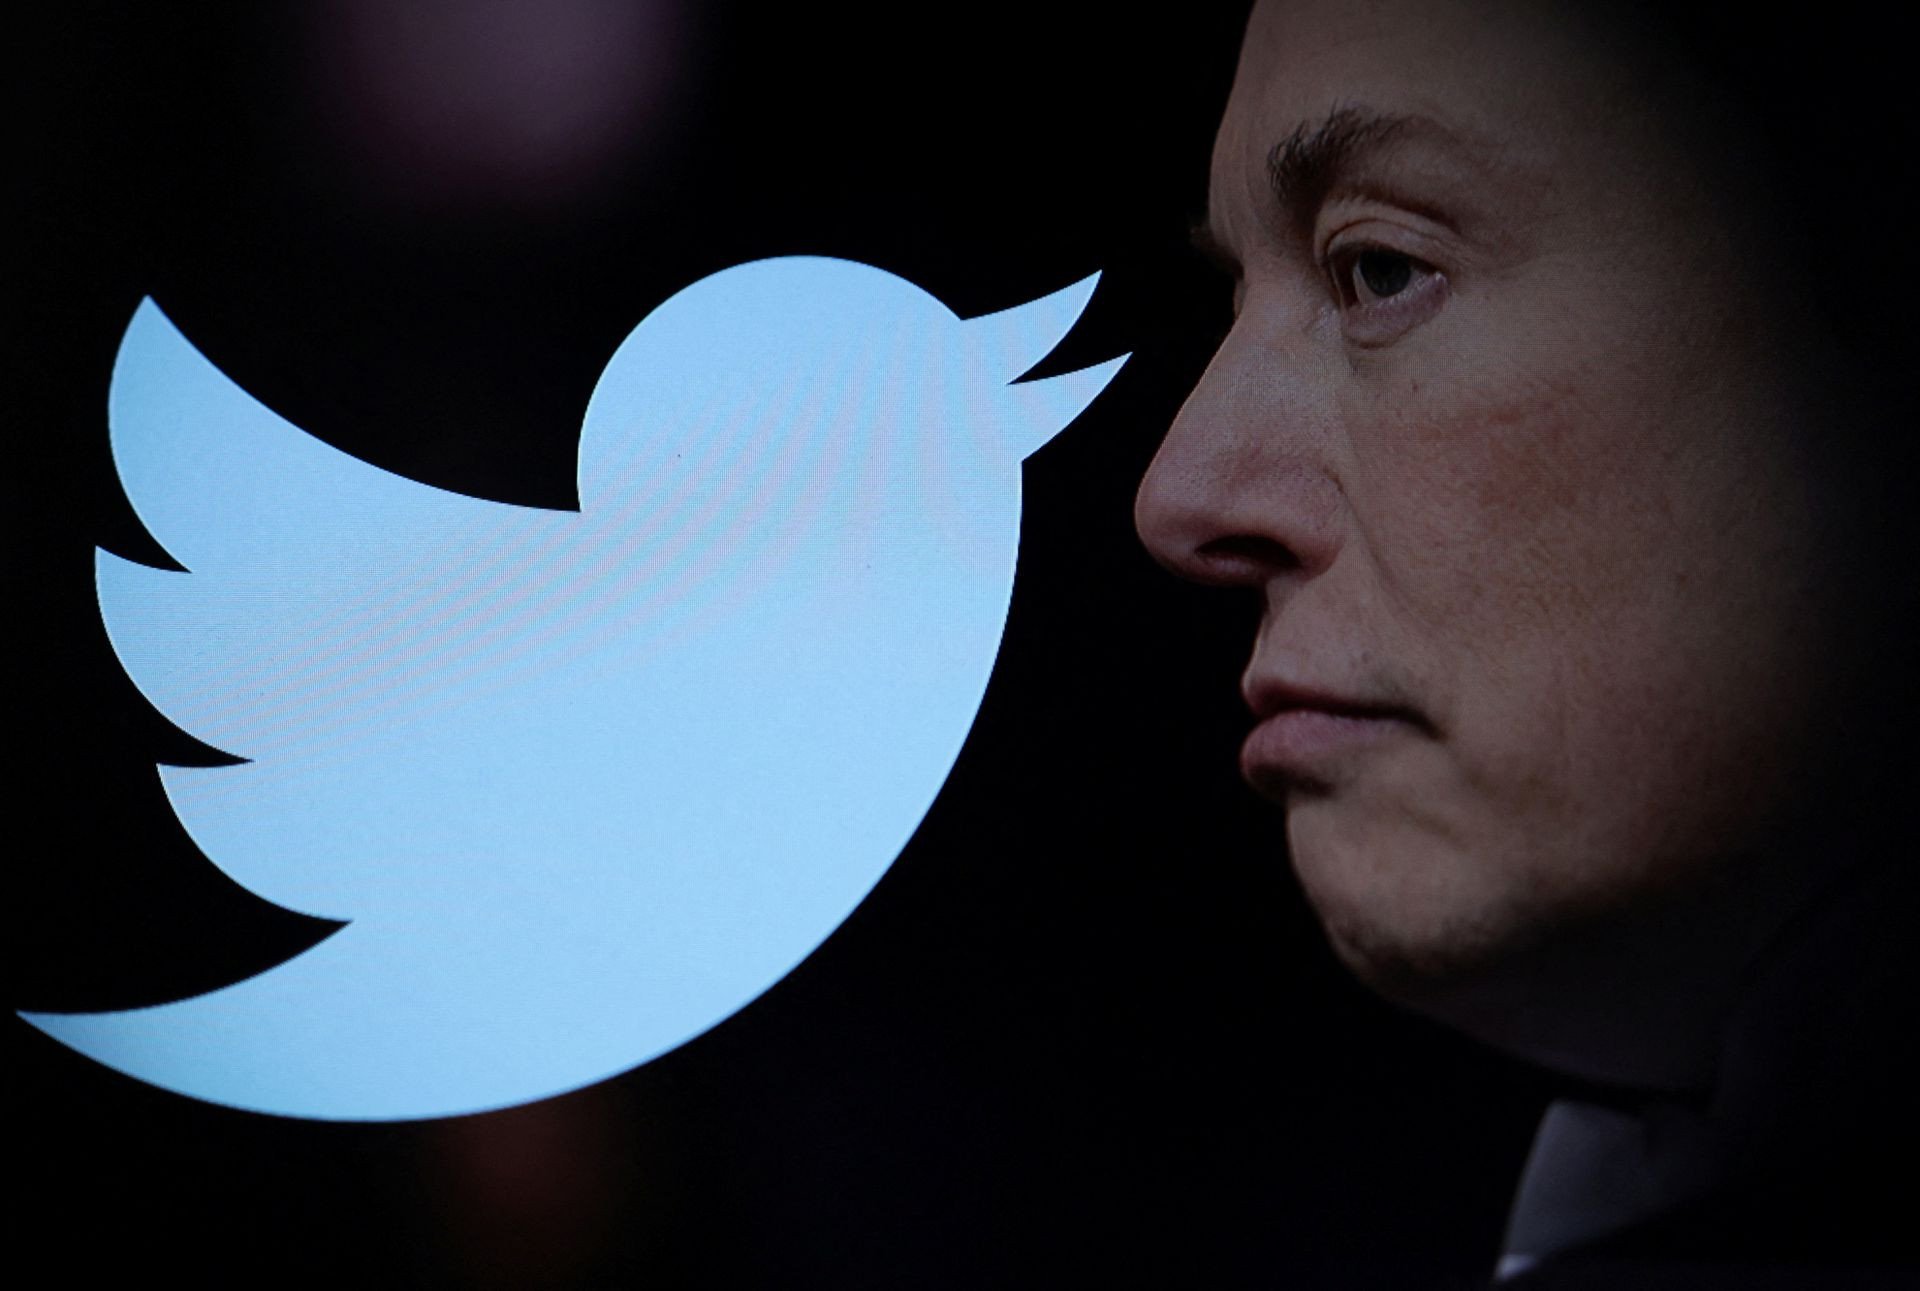 Elon Musk completes Twitter deal, fires CEO Parag Agarwal among other top executives